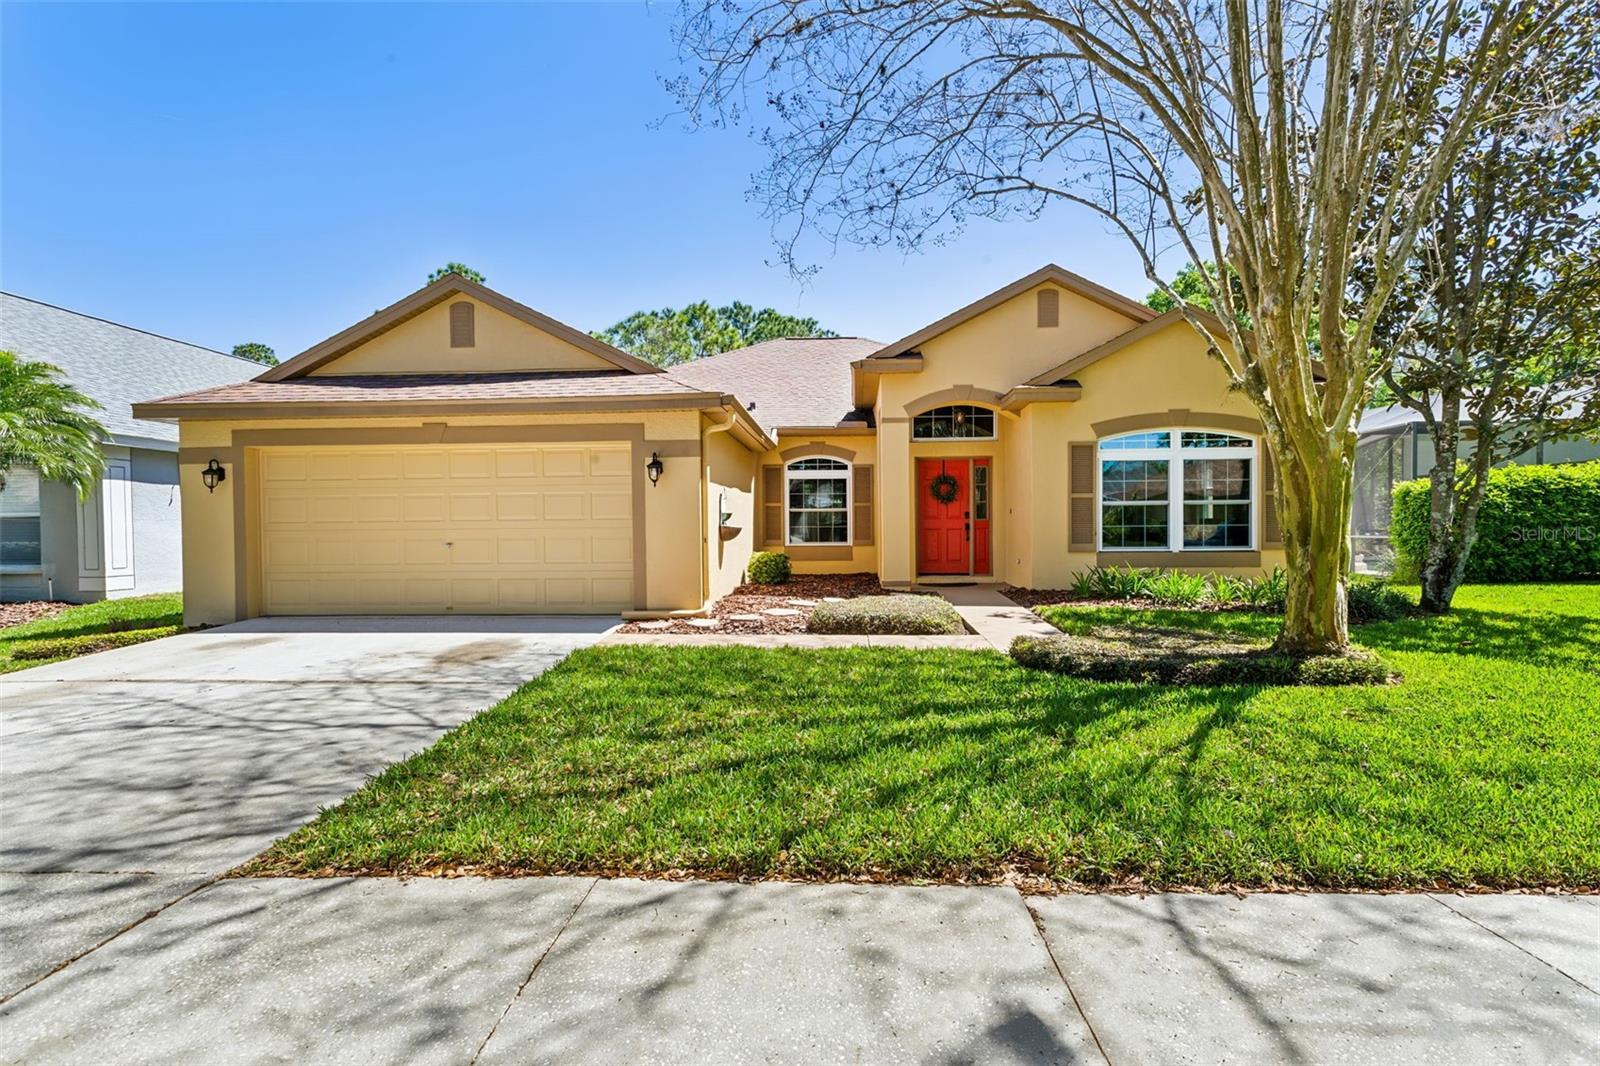 Photo one of 5840 Heronview Crescent Dr Lithia FL 33547 | MLS T3512699